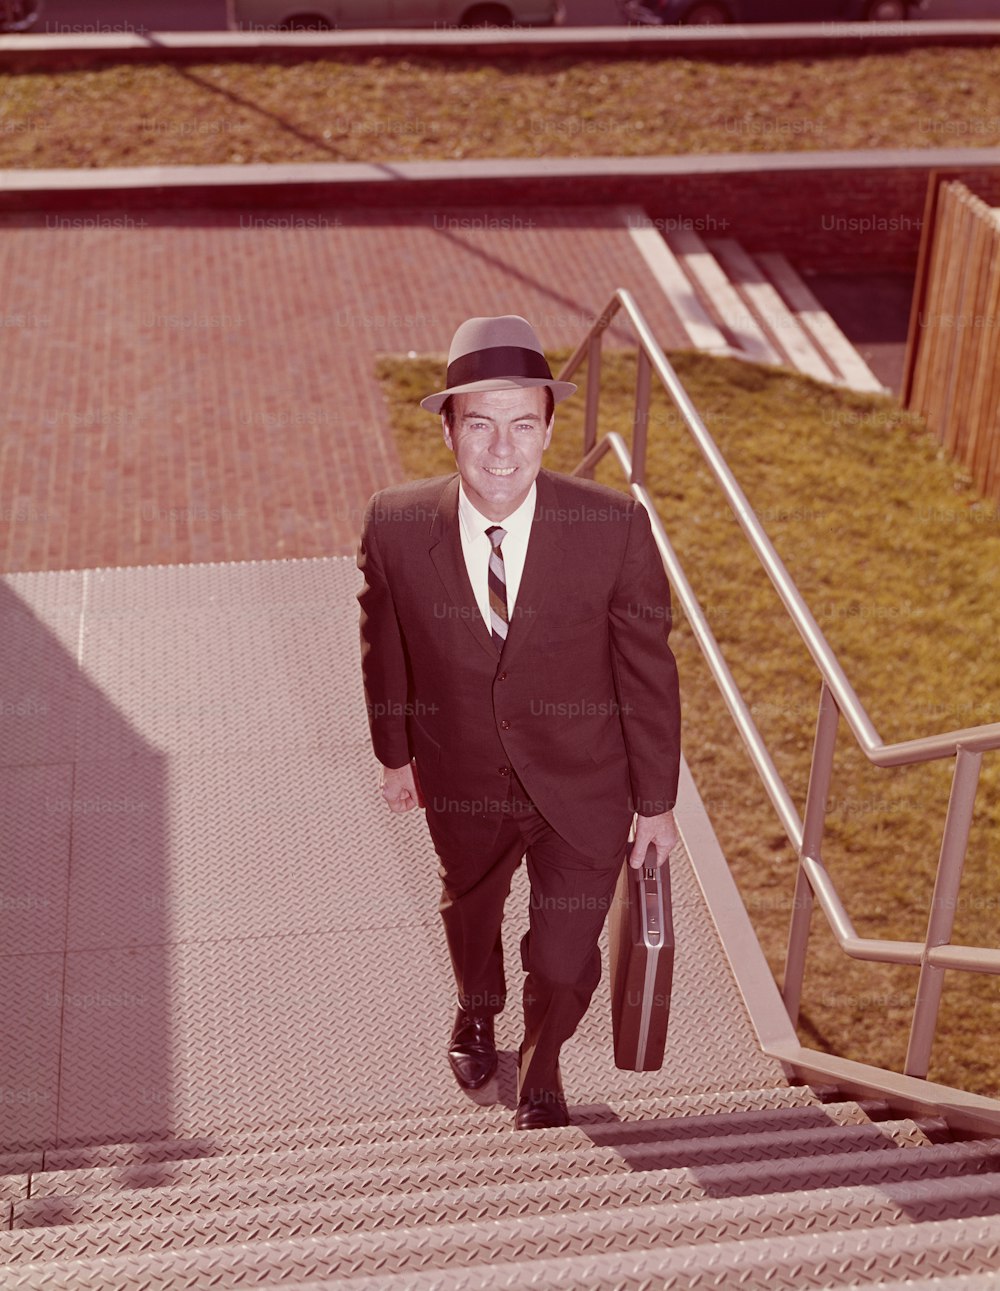 UNITED STATES - CIRCA 1960s:  Salesman climbing stairs, elevated view.